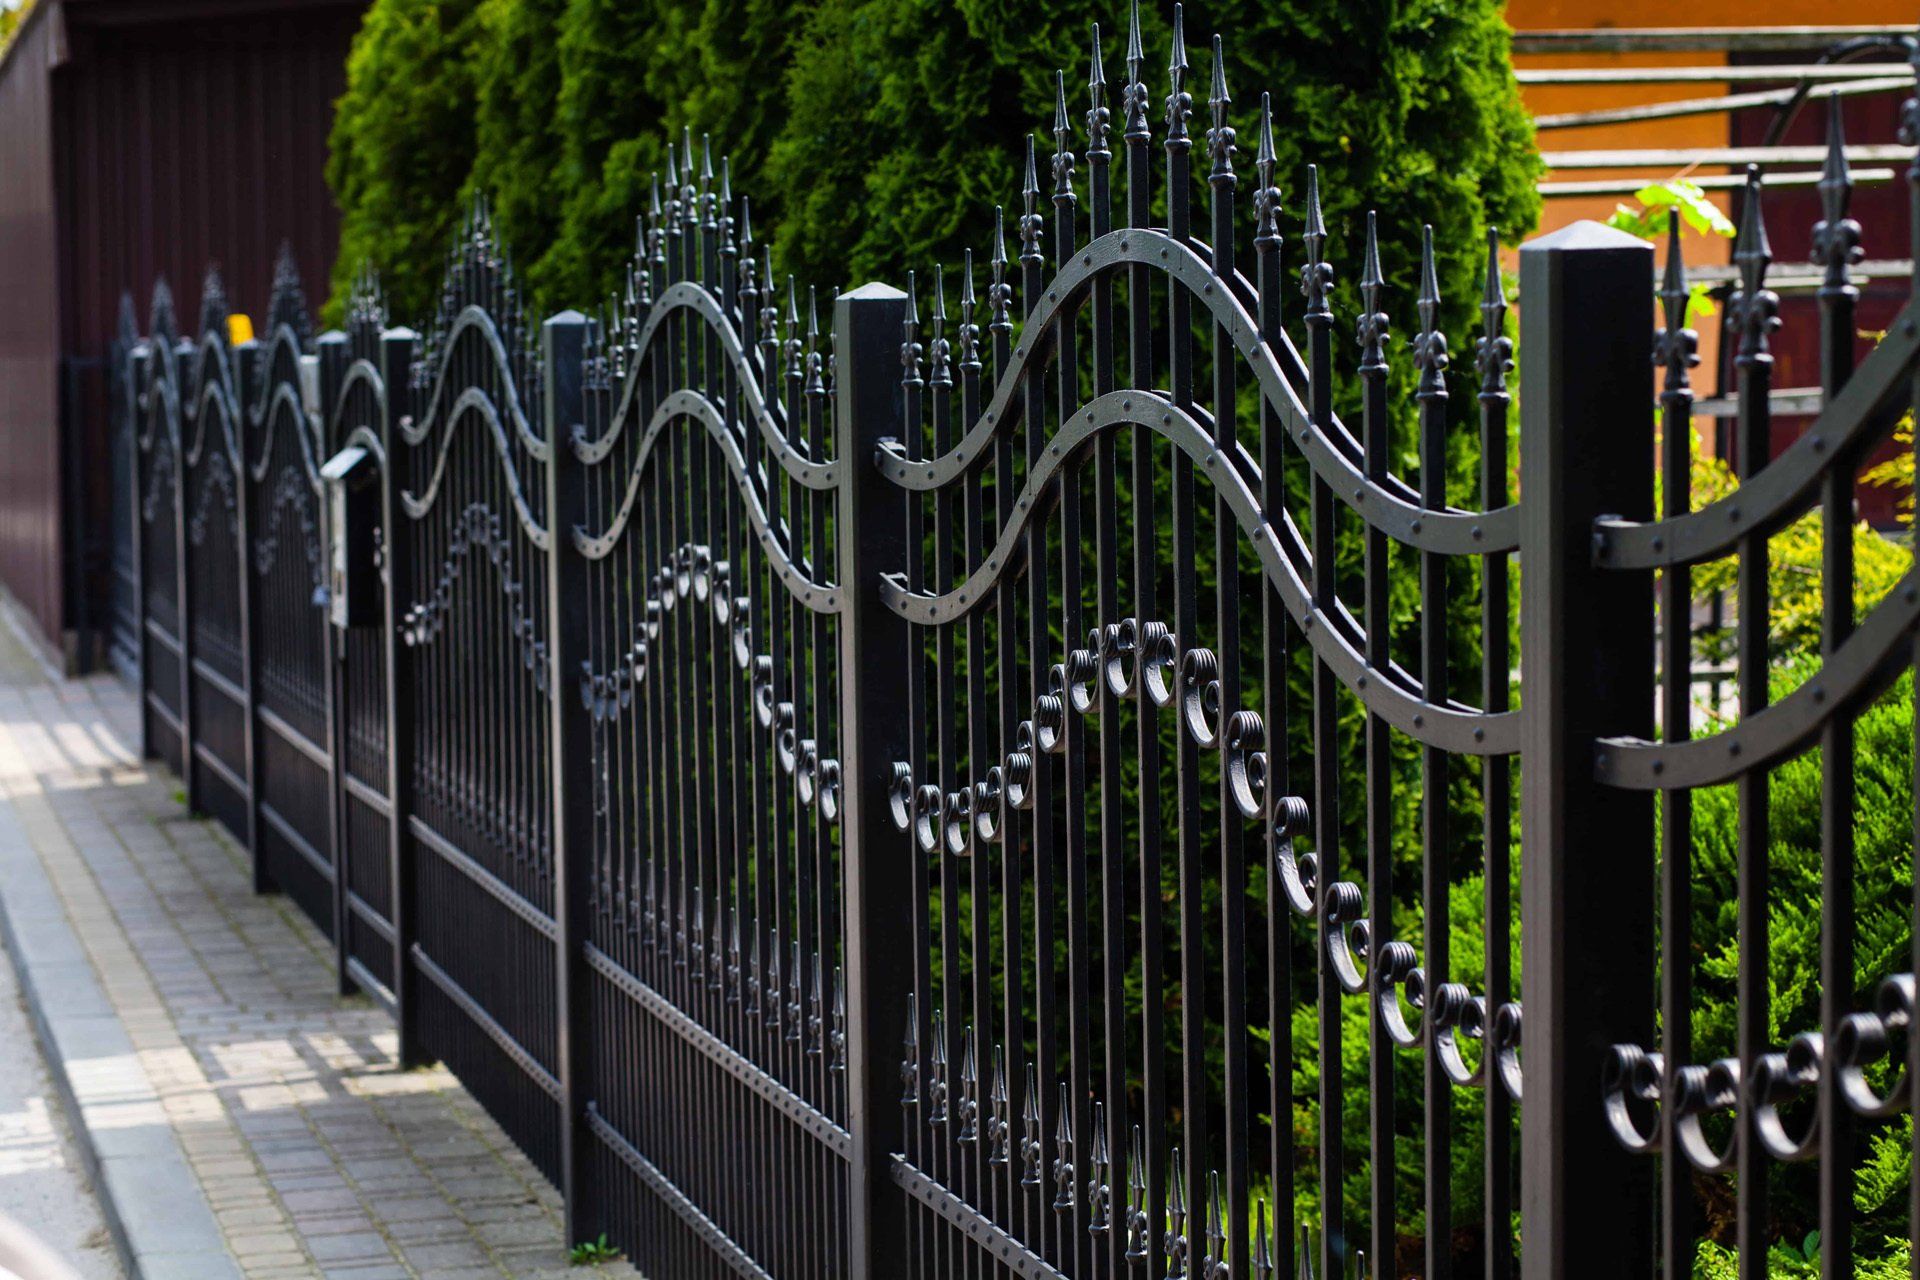 Wrought iron fence is the strongest fencing material